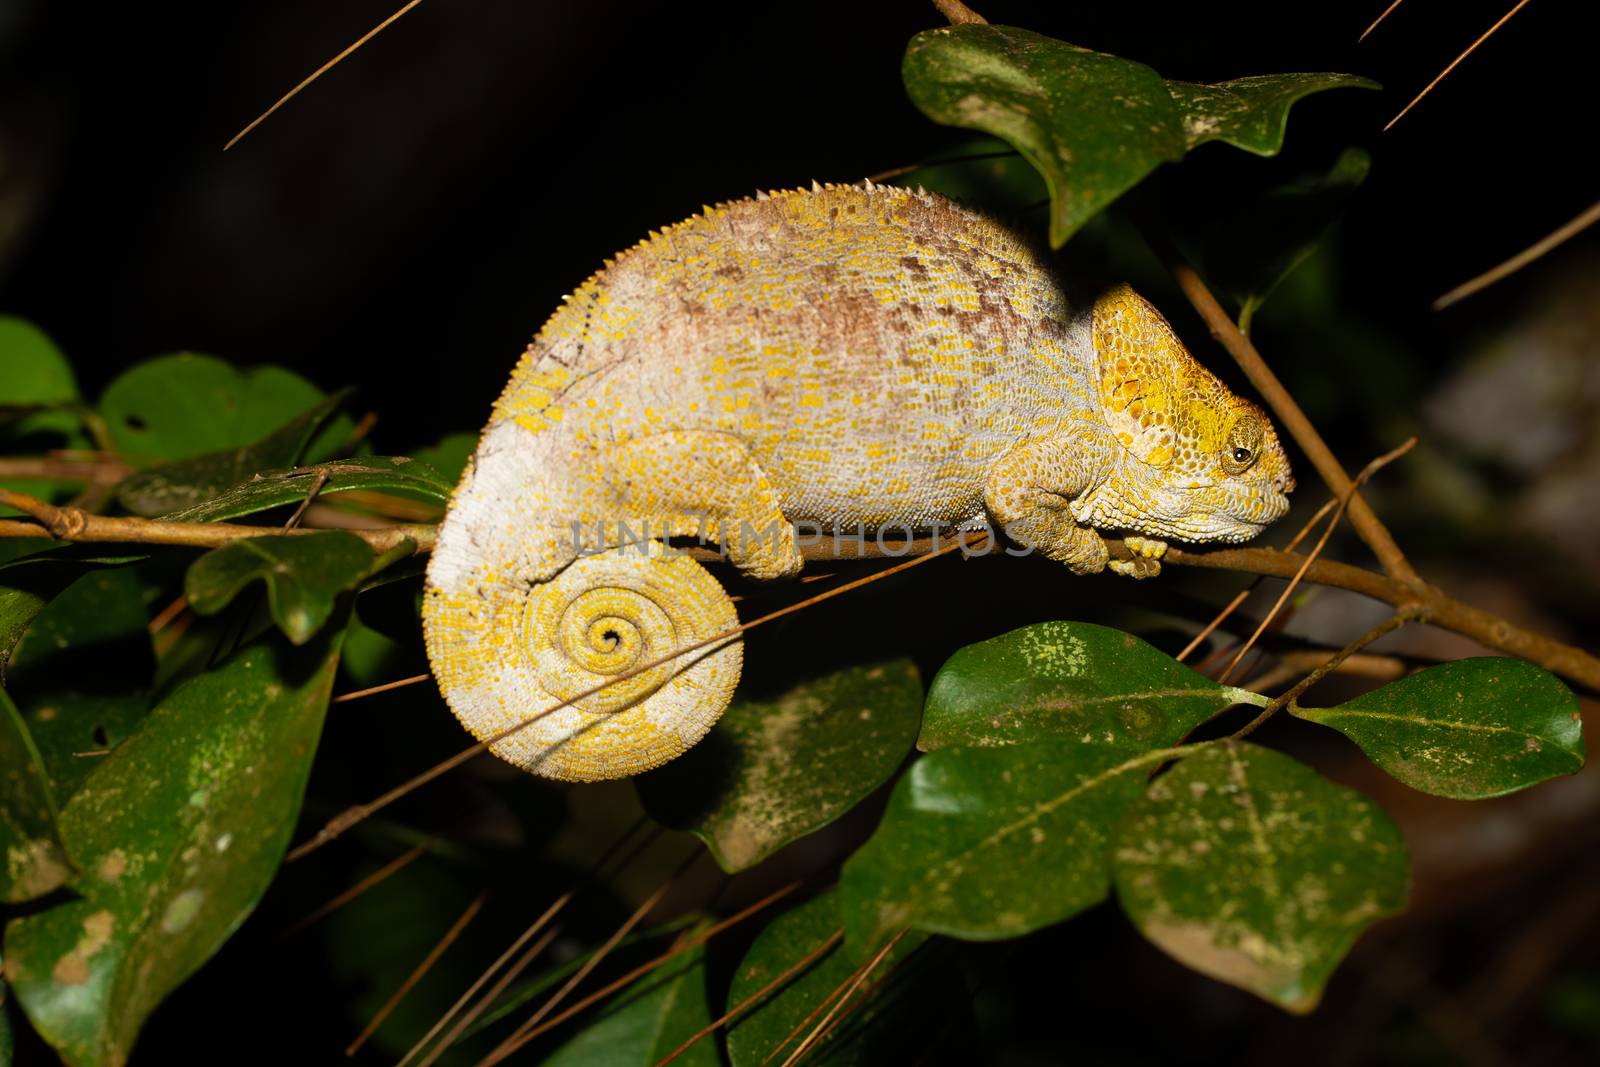 A chameleon on a branch with green leaves by 25ehaag6